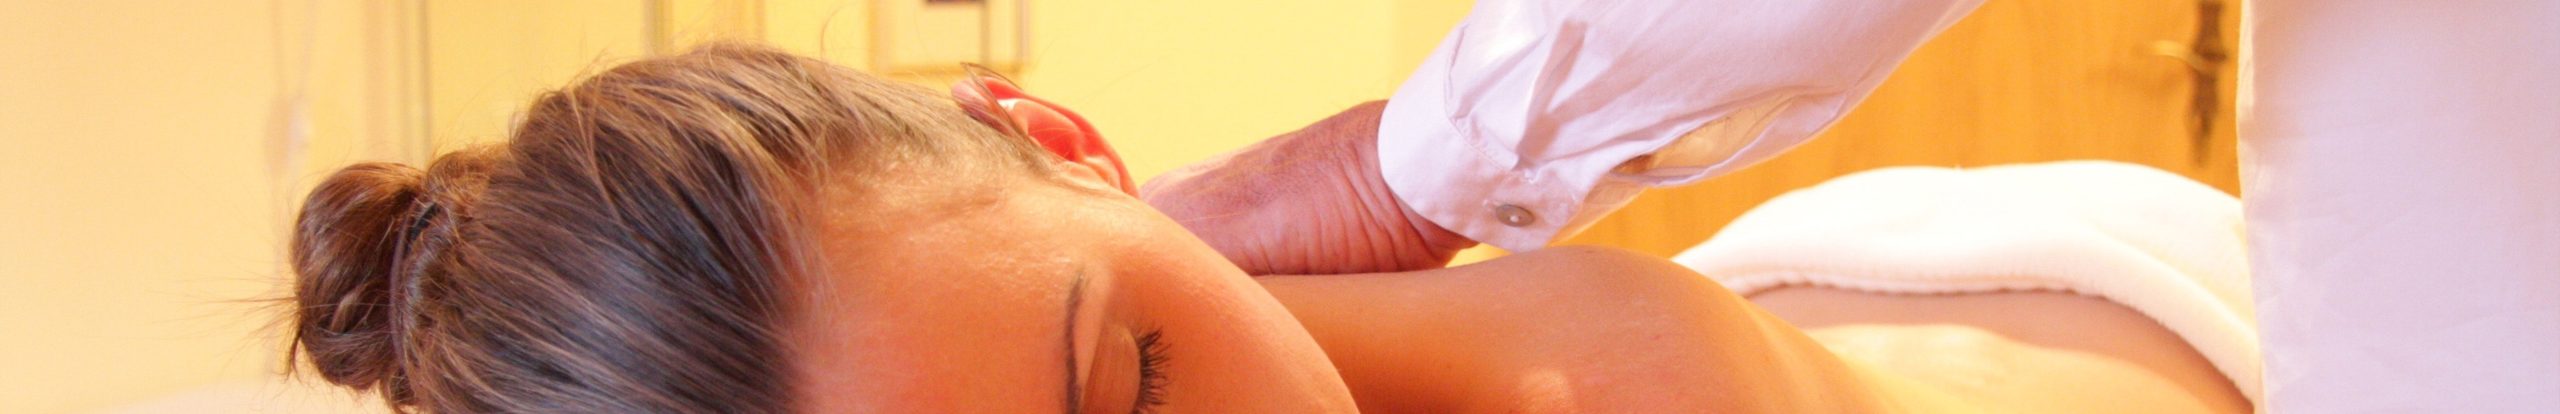 Massage Therapy - Banner